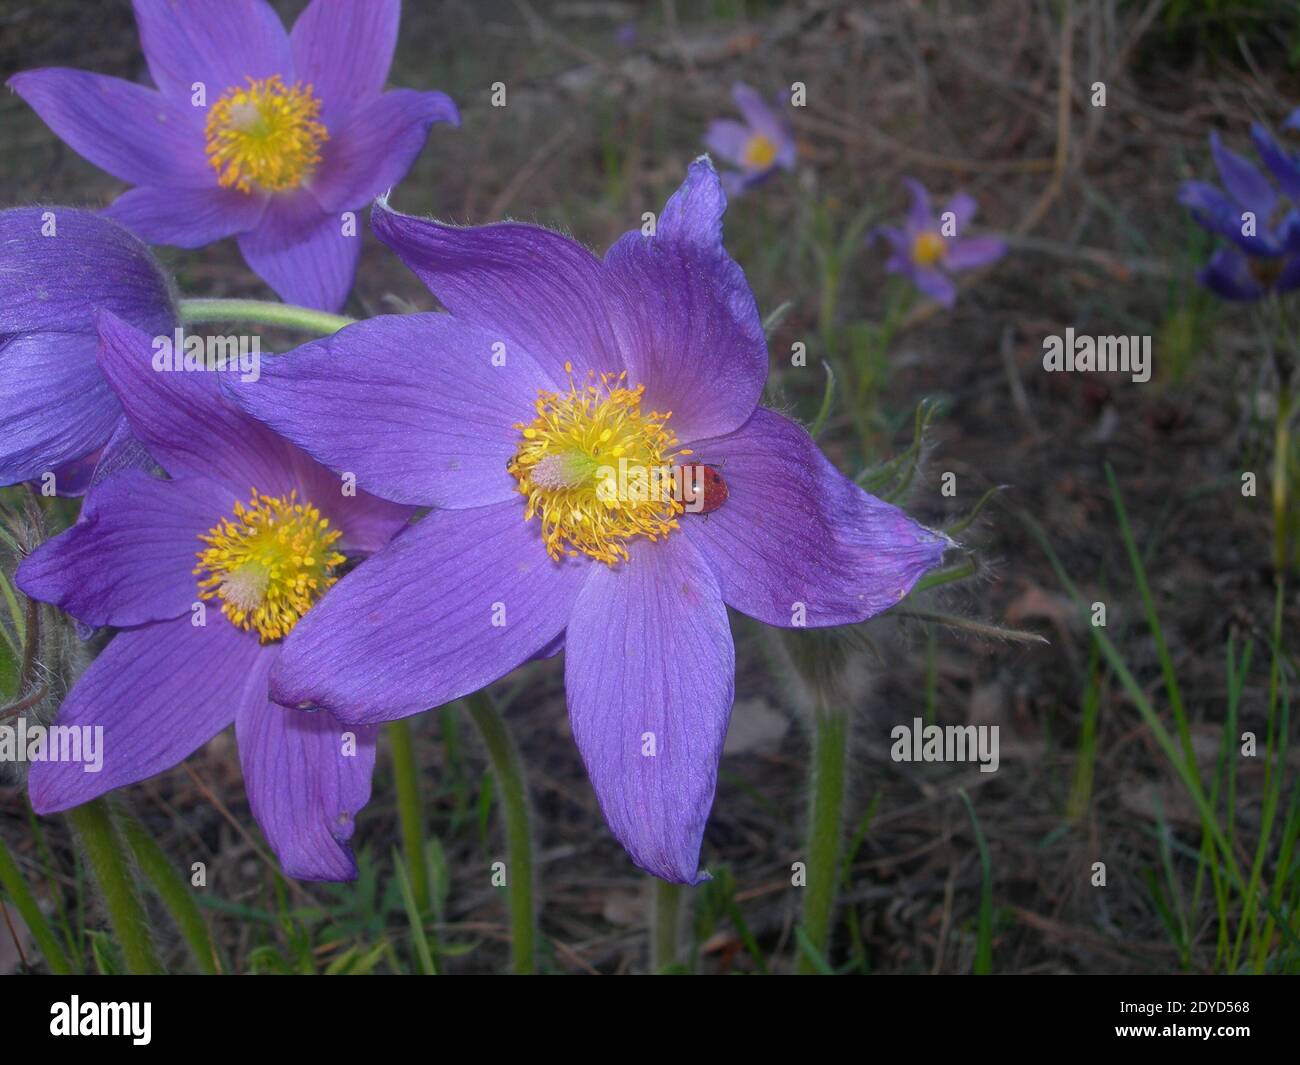 Delicate purple flowers with a golden center on a sunny spring day. Red ladybug sits in a purple spring flower. Pulsatilla patens or spreading anemone Stock Photo